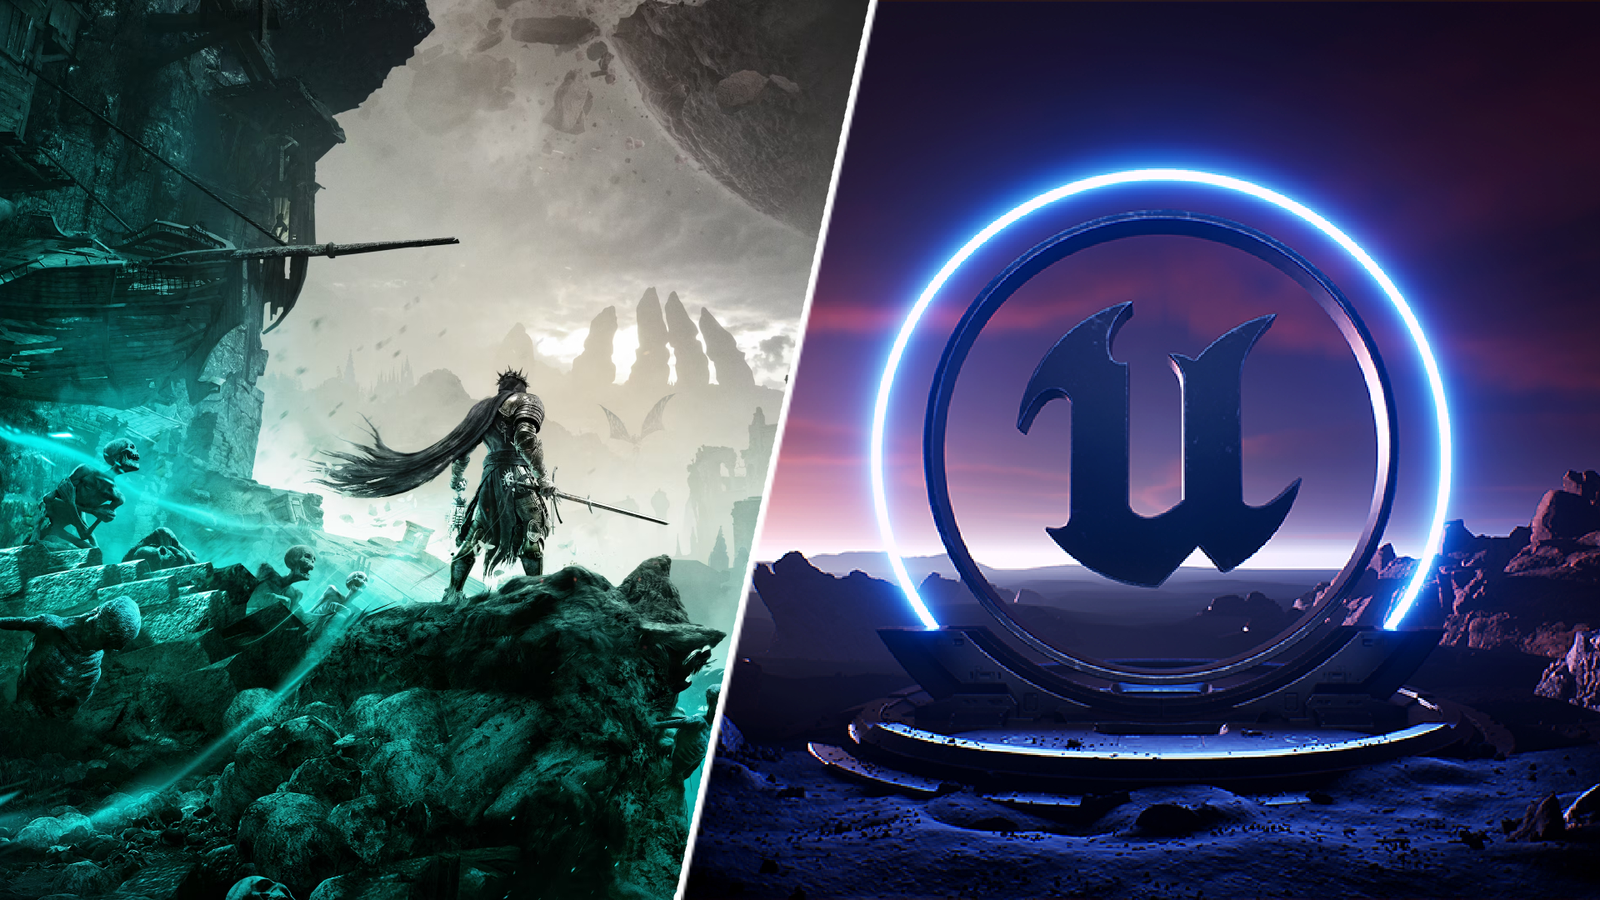 Here's what Skyrim could look like remade in Unreal Engine 5